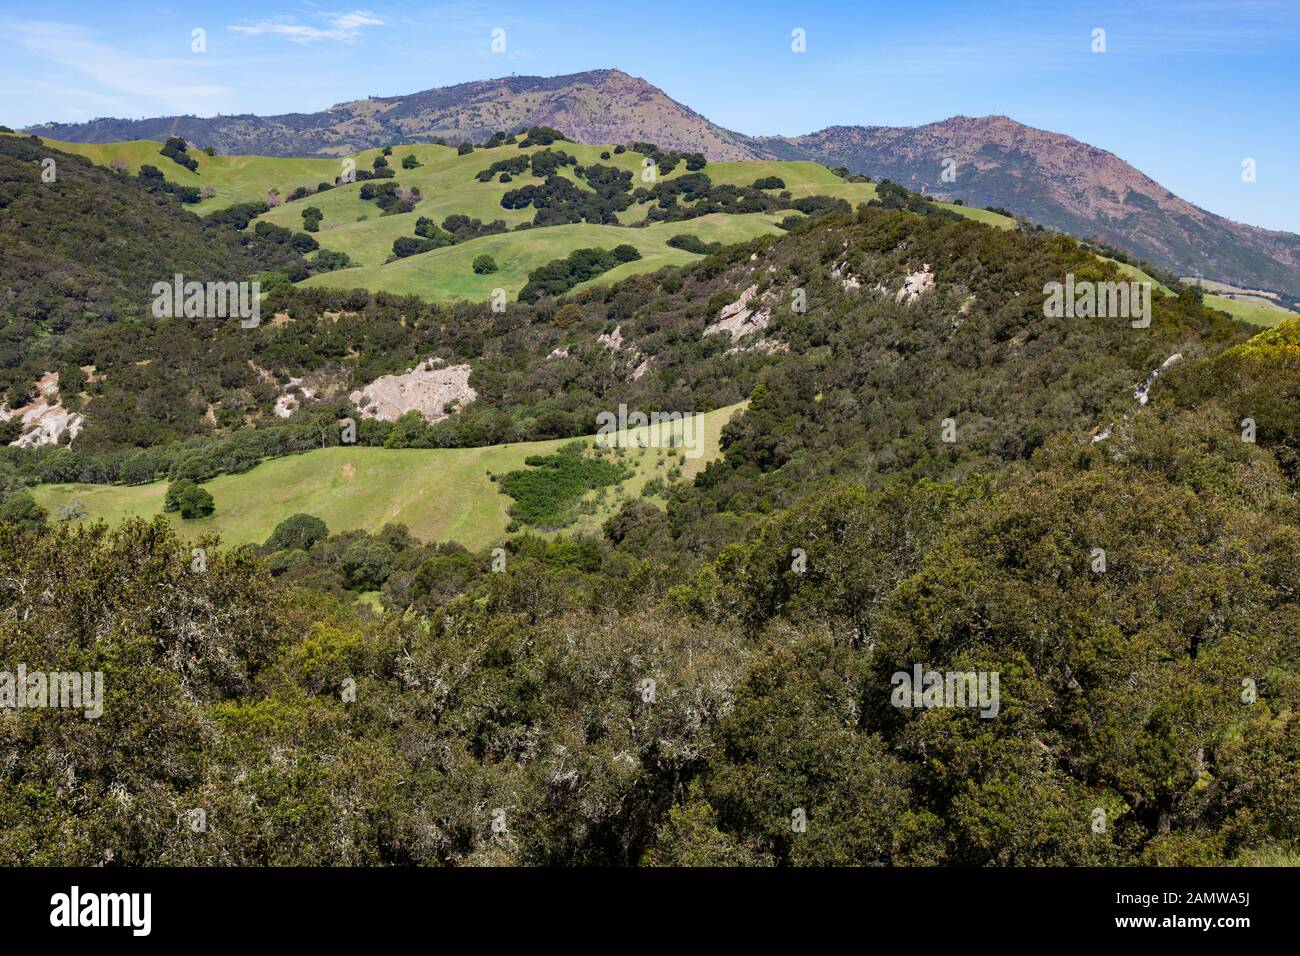 Hillsides of Morgan Territory Regional Preserve, an East Bay Regional Park located in California's Contra Costa County at the base of Mount Diablo. Stock Photo